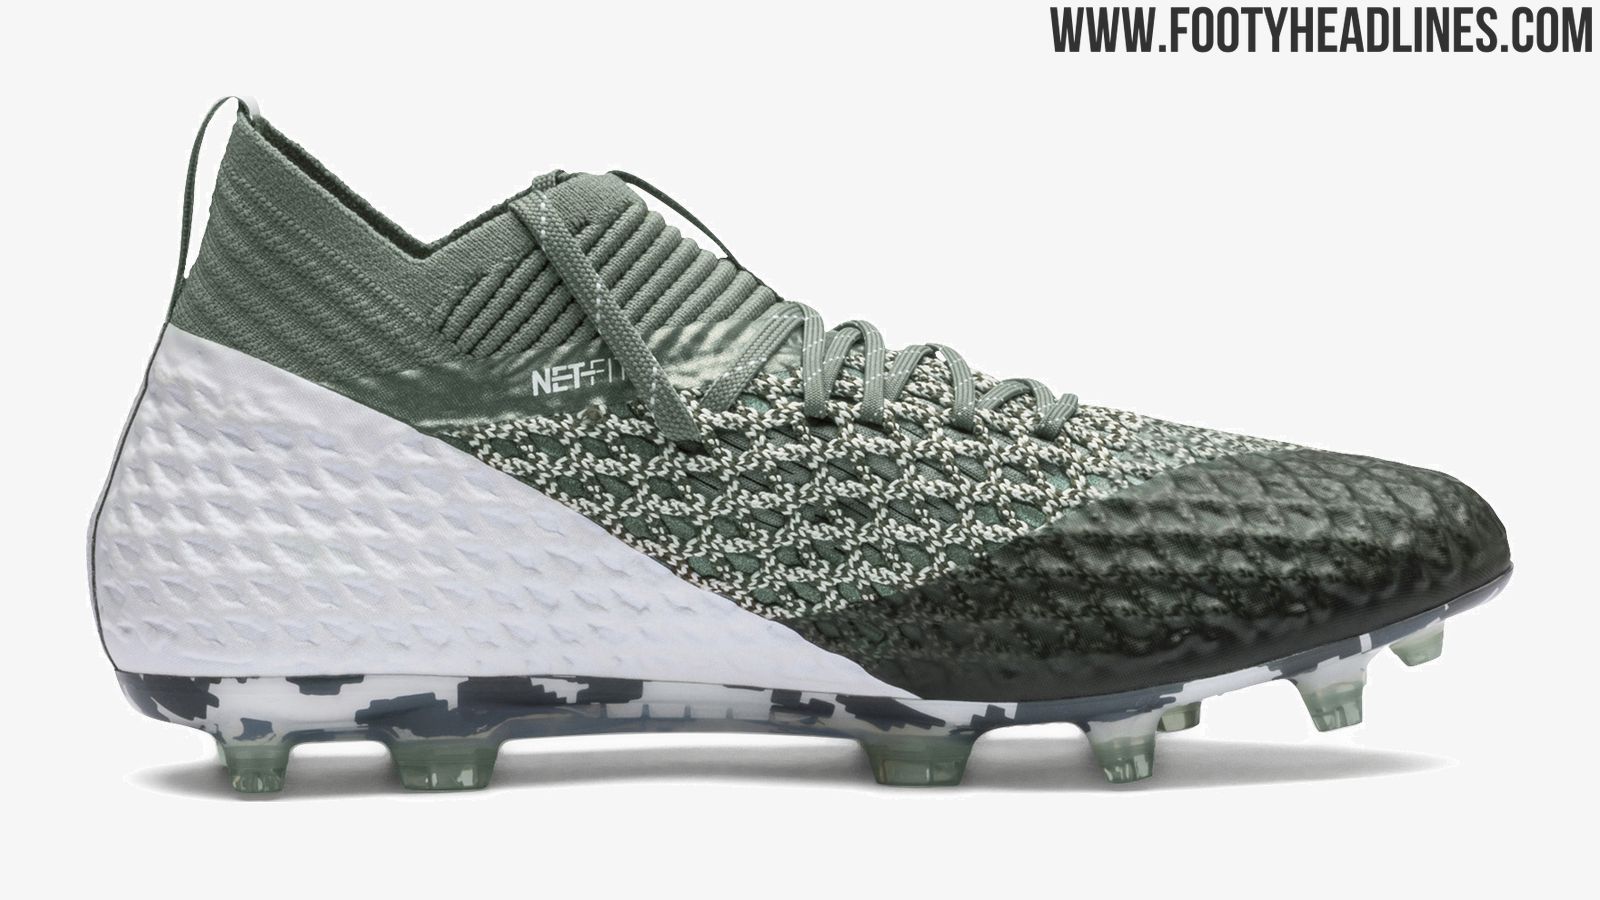 Camouflage Future Netfit 2.1 'Attack Released - Footy Headlines